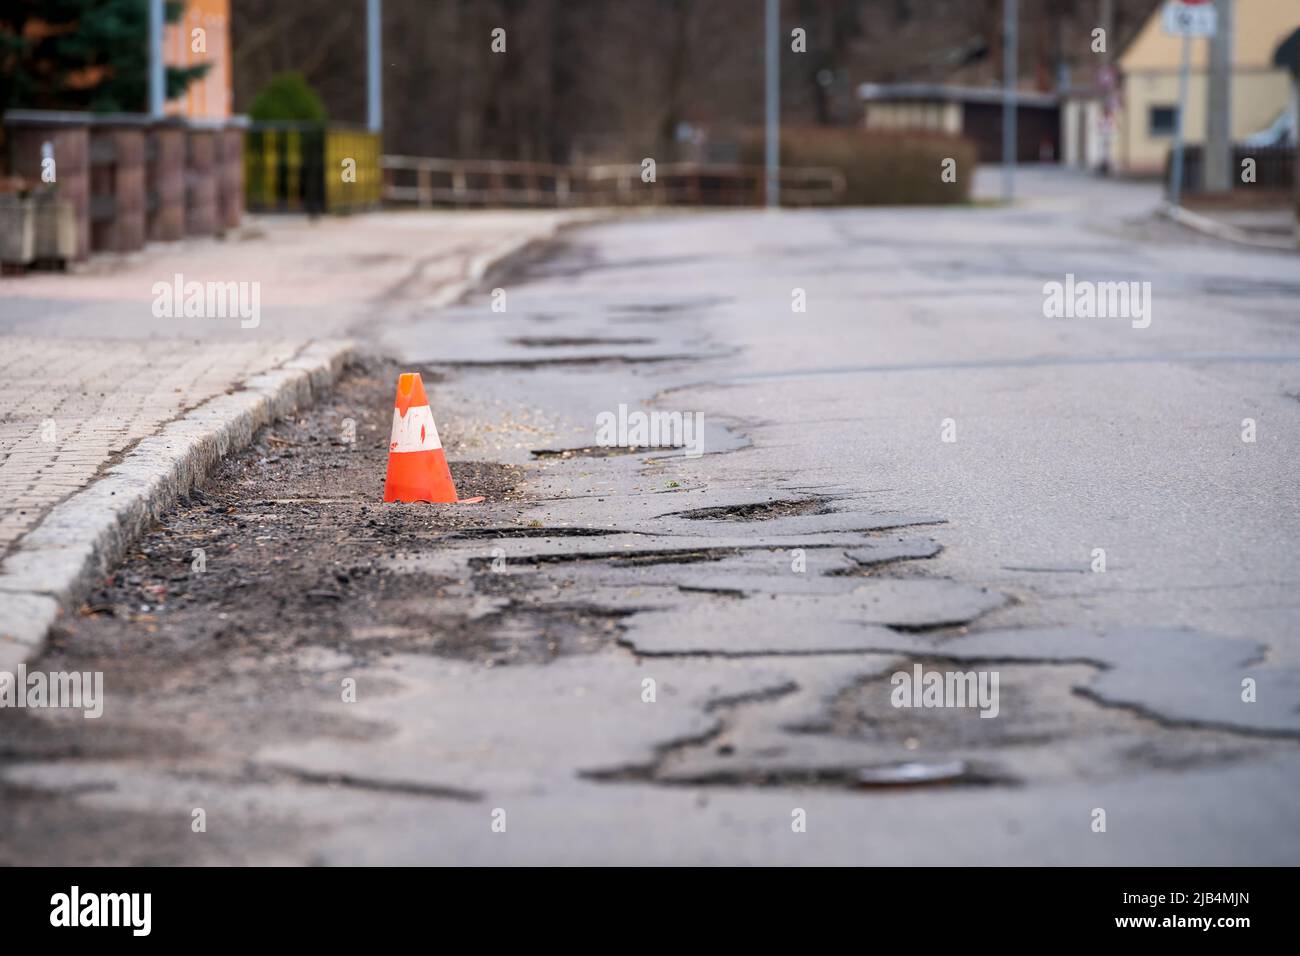 Damaged asphalt pavement road with potholes and traffic cone Stock Photo